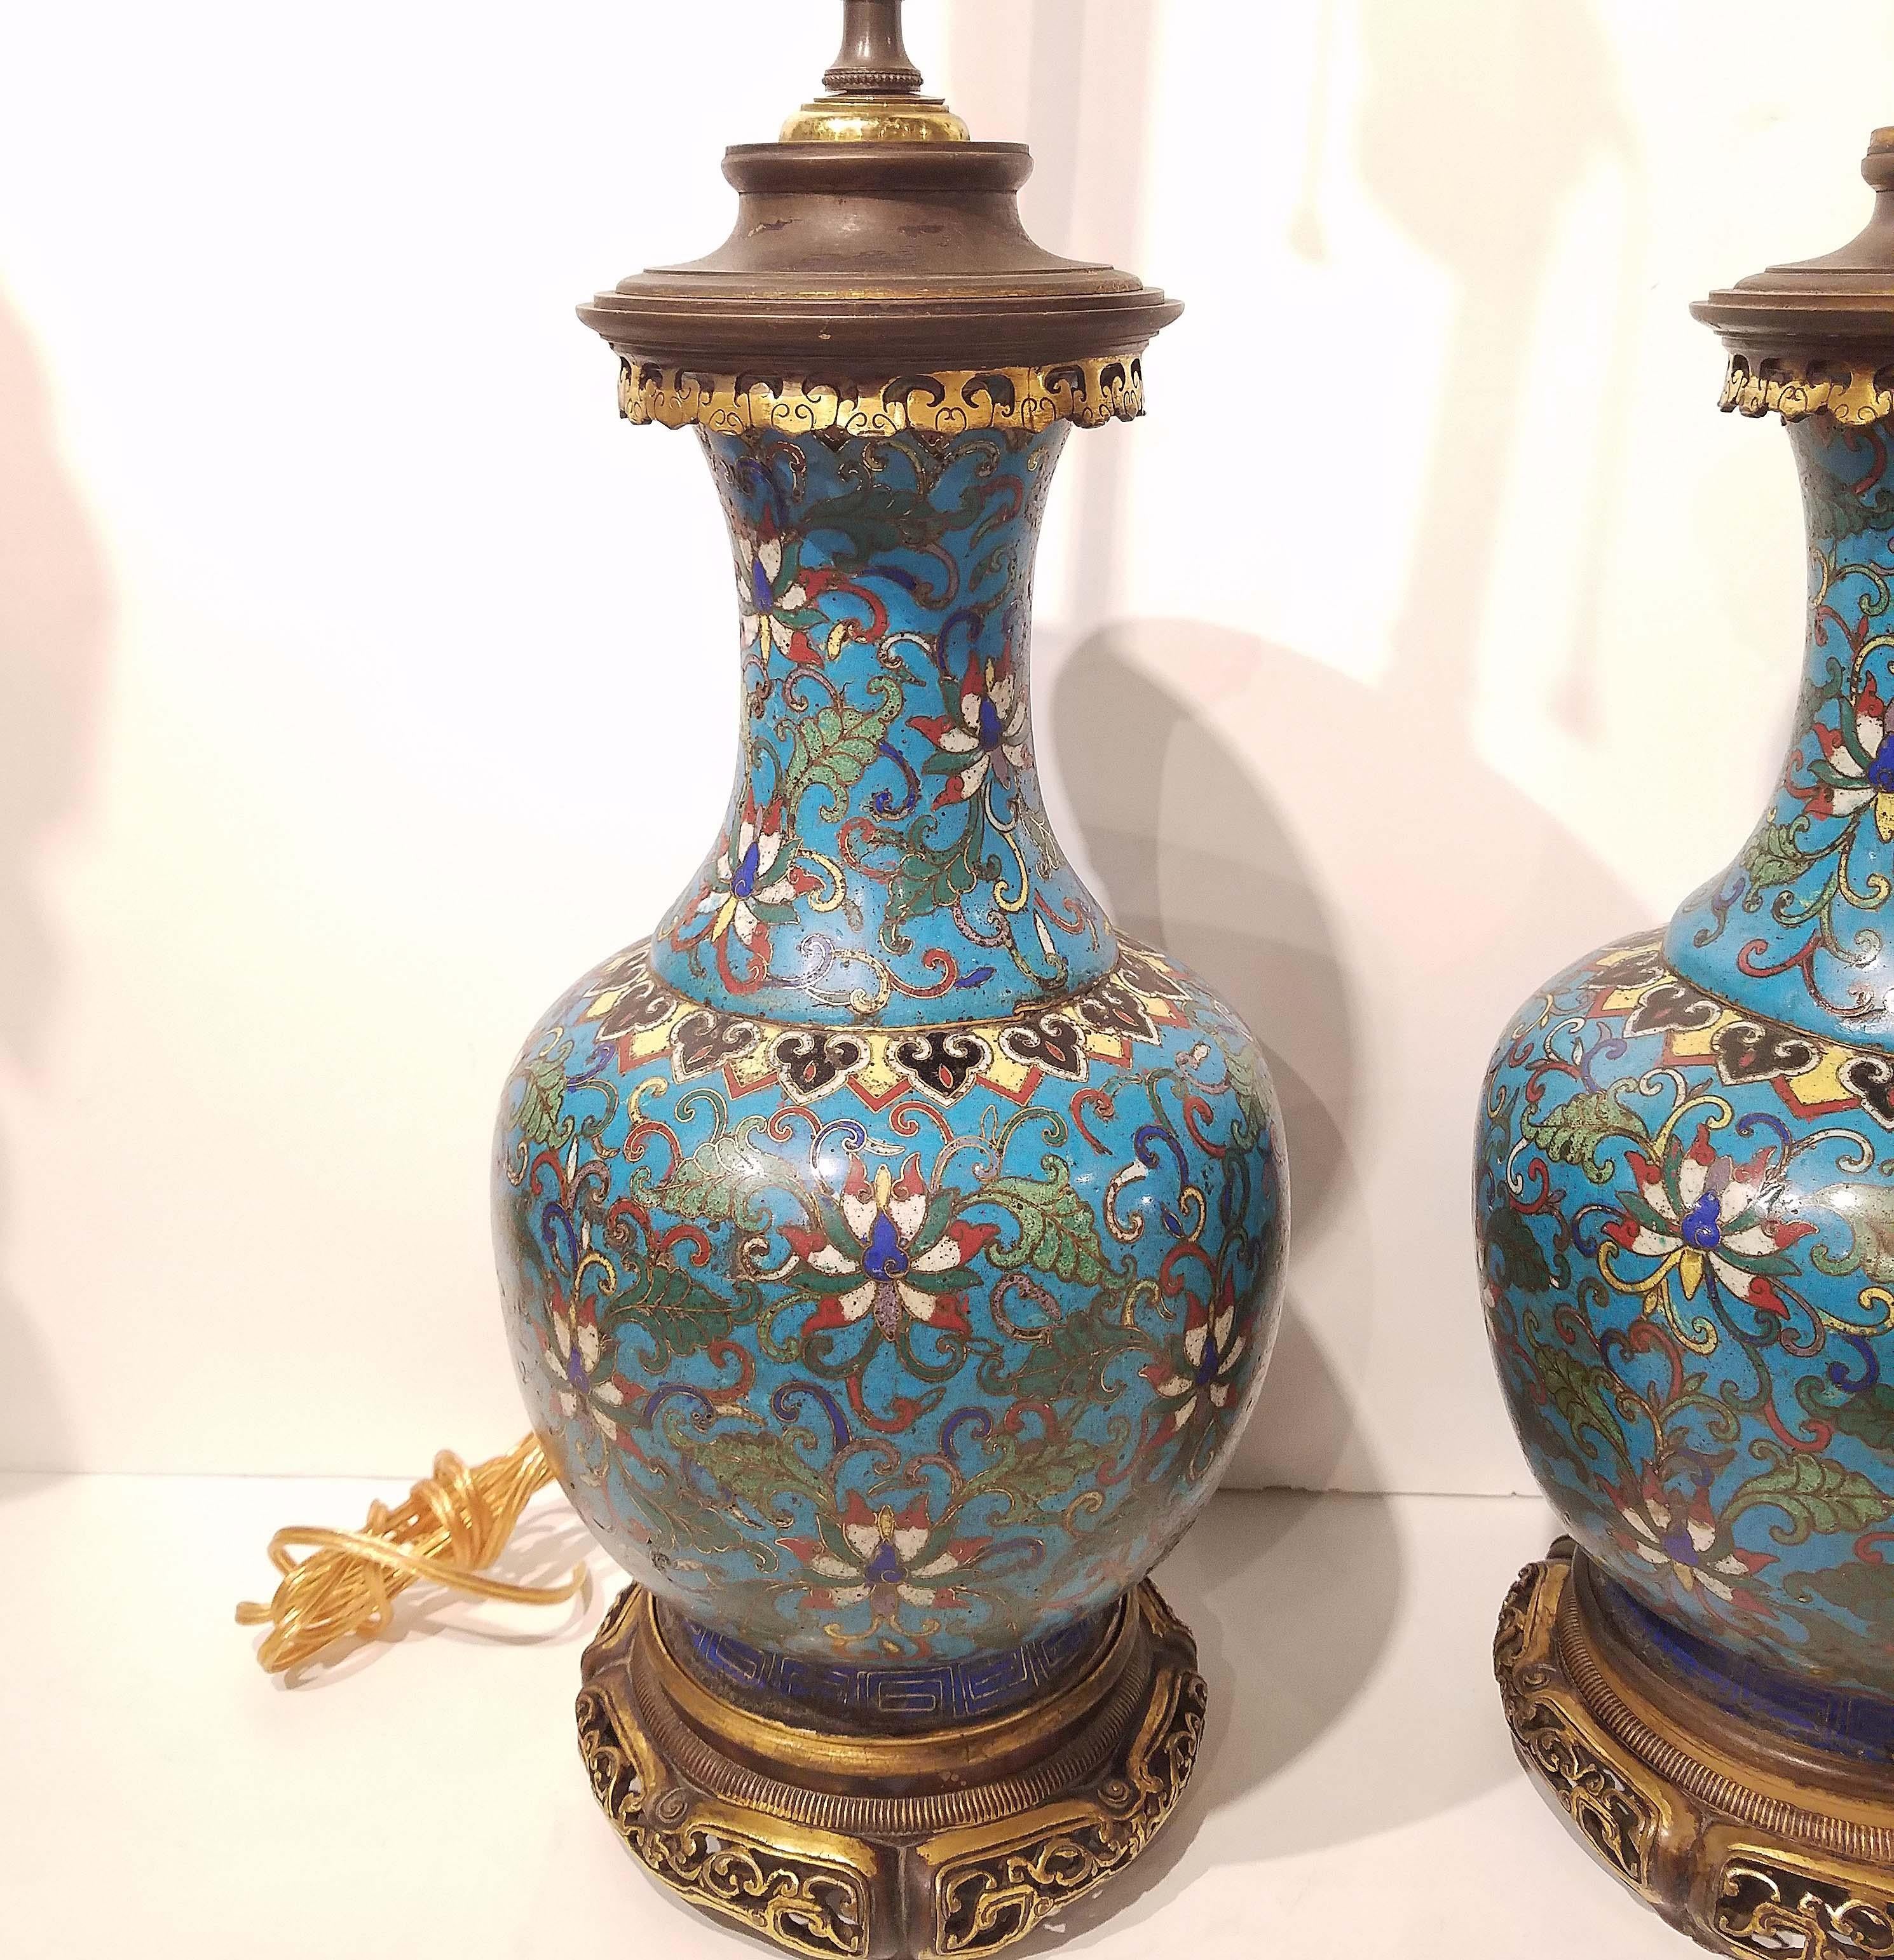 Ming Pair of Chinese Cloisonné Vases Made into Lamps, 18th Century